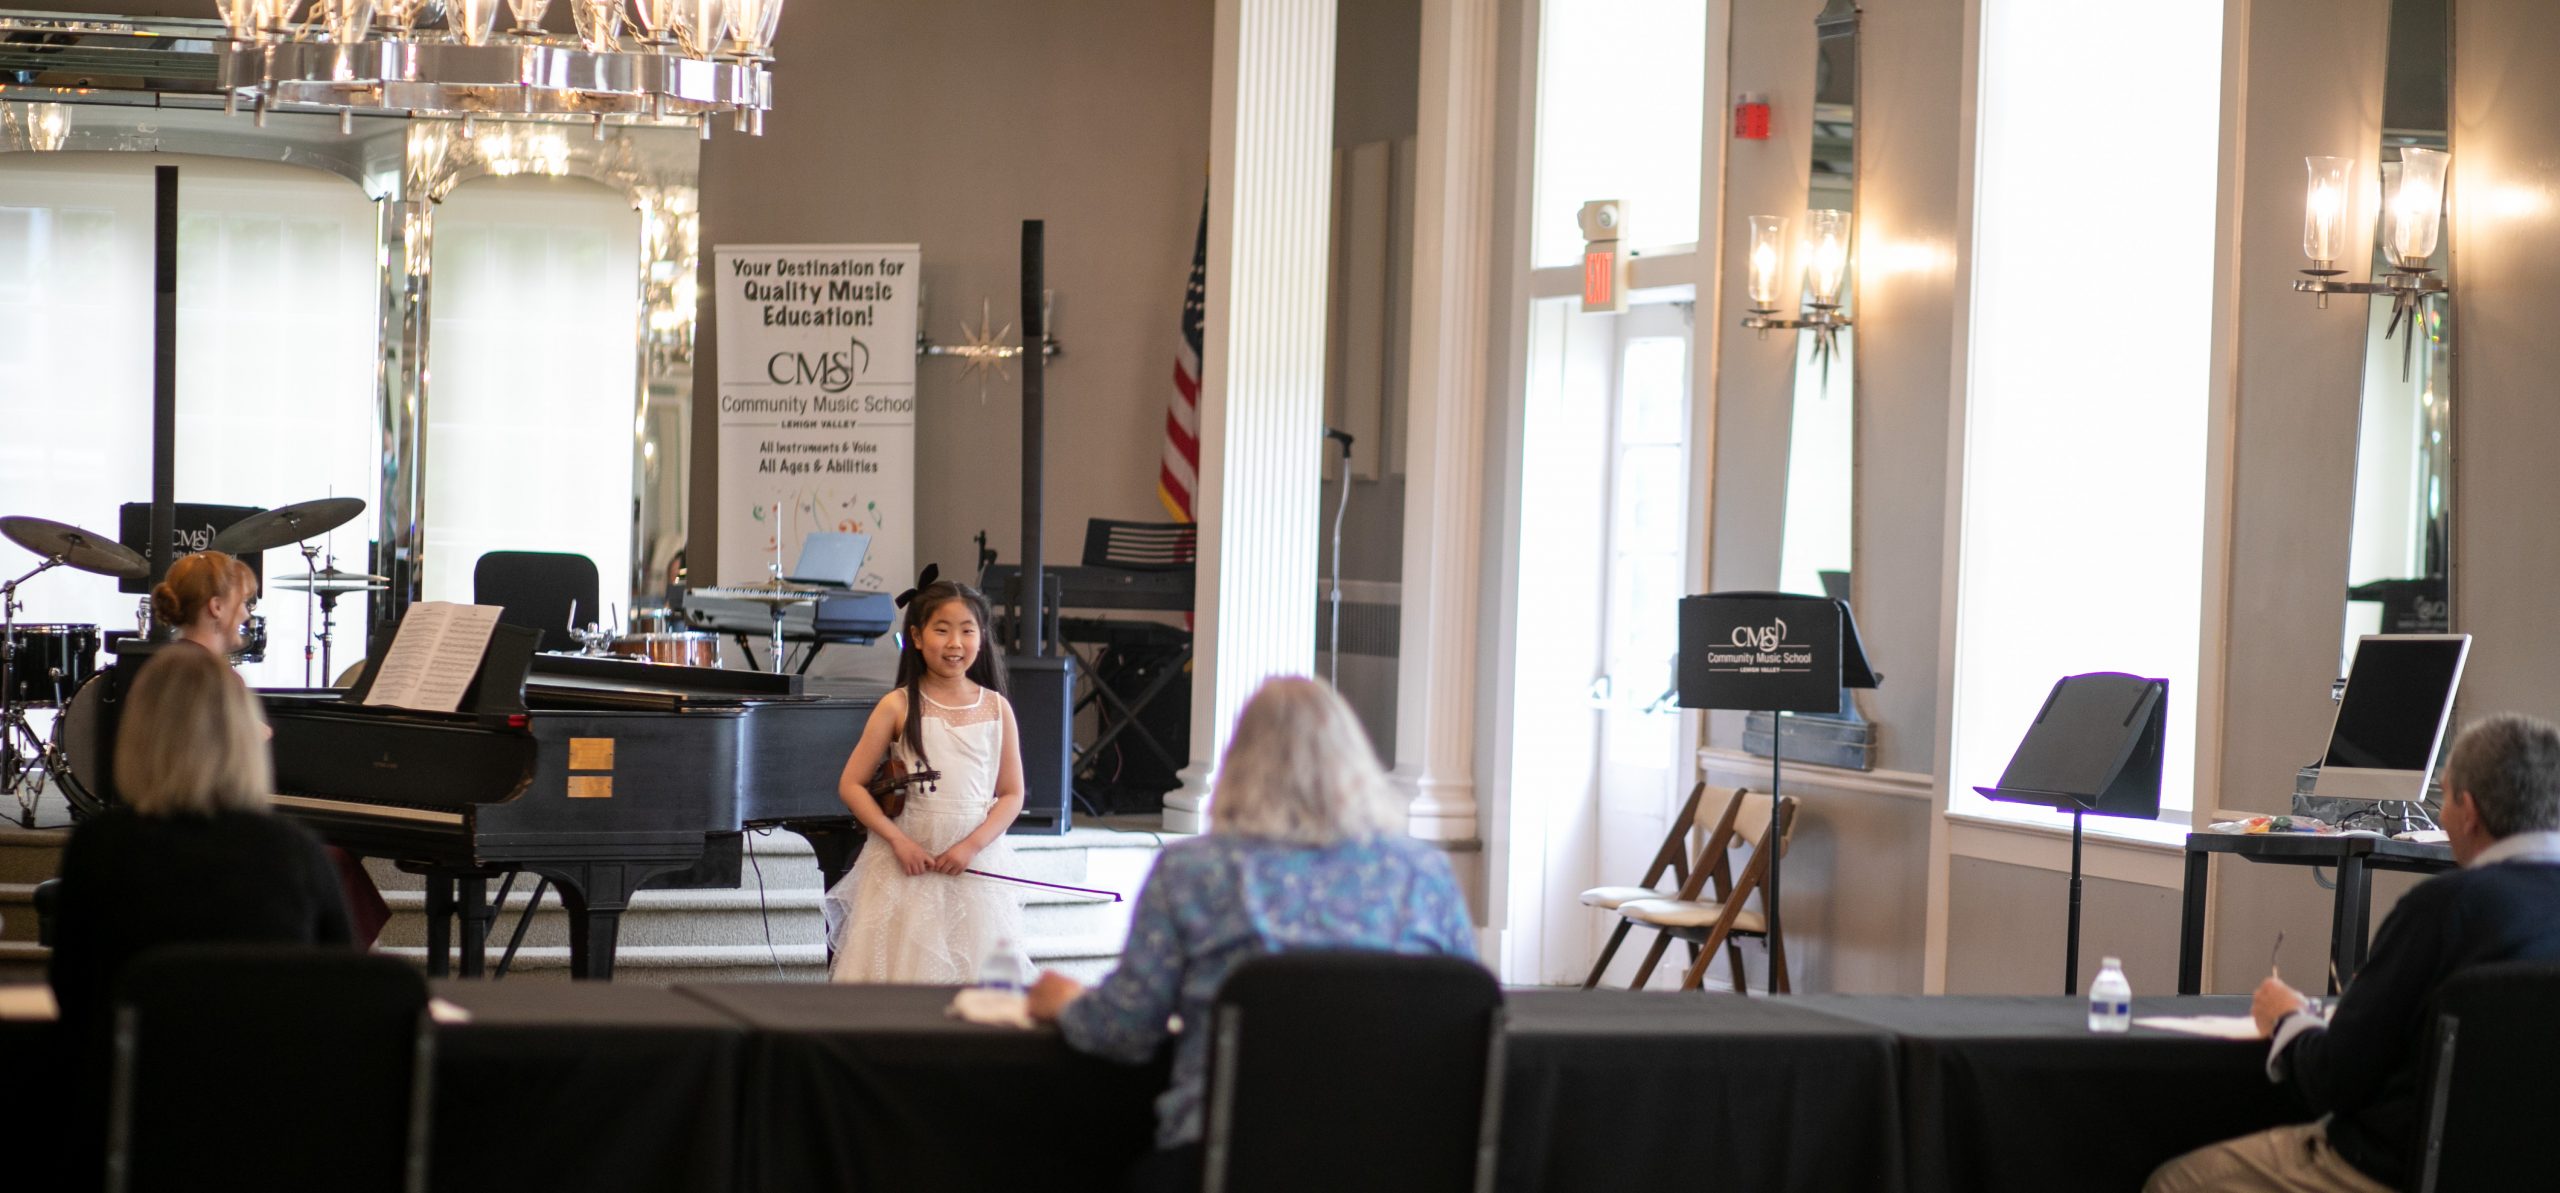 A violin student auditions before a panel of judges for a scholarship to Community Music School.